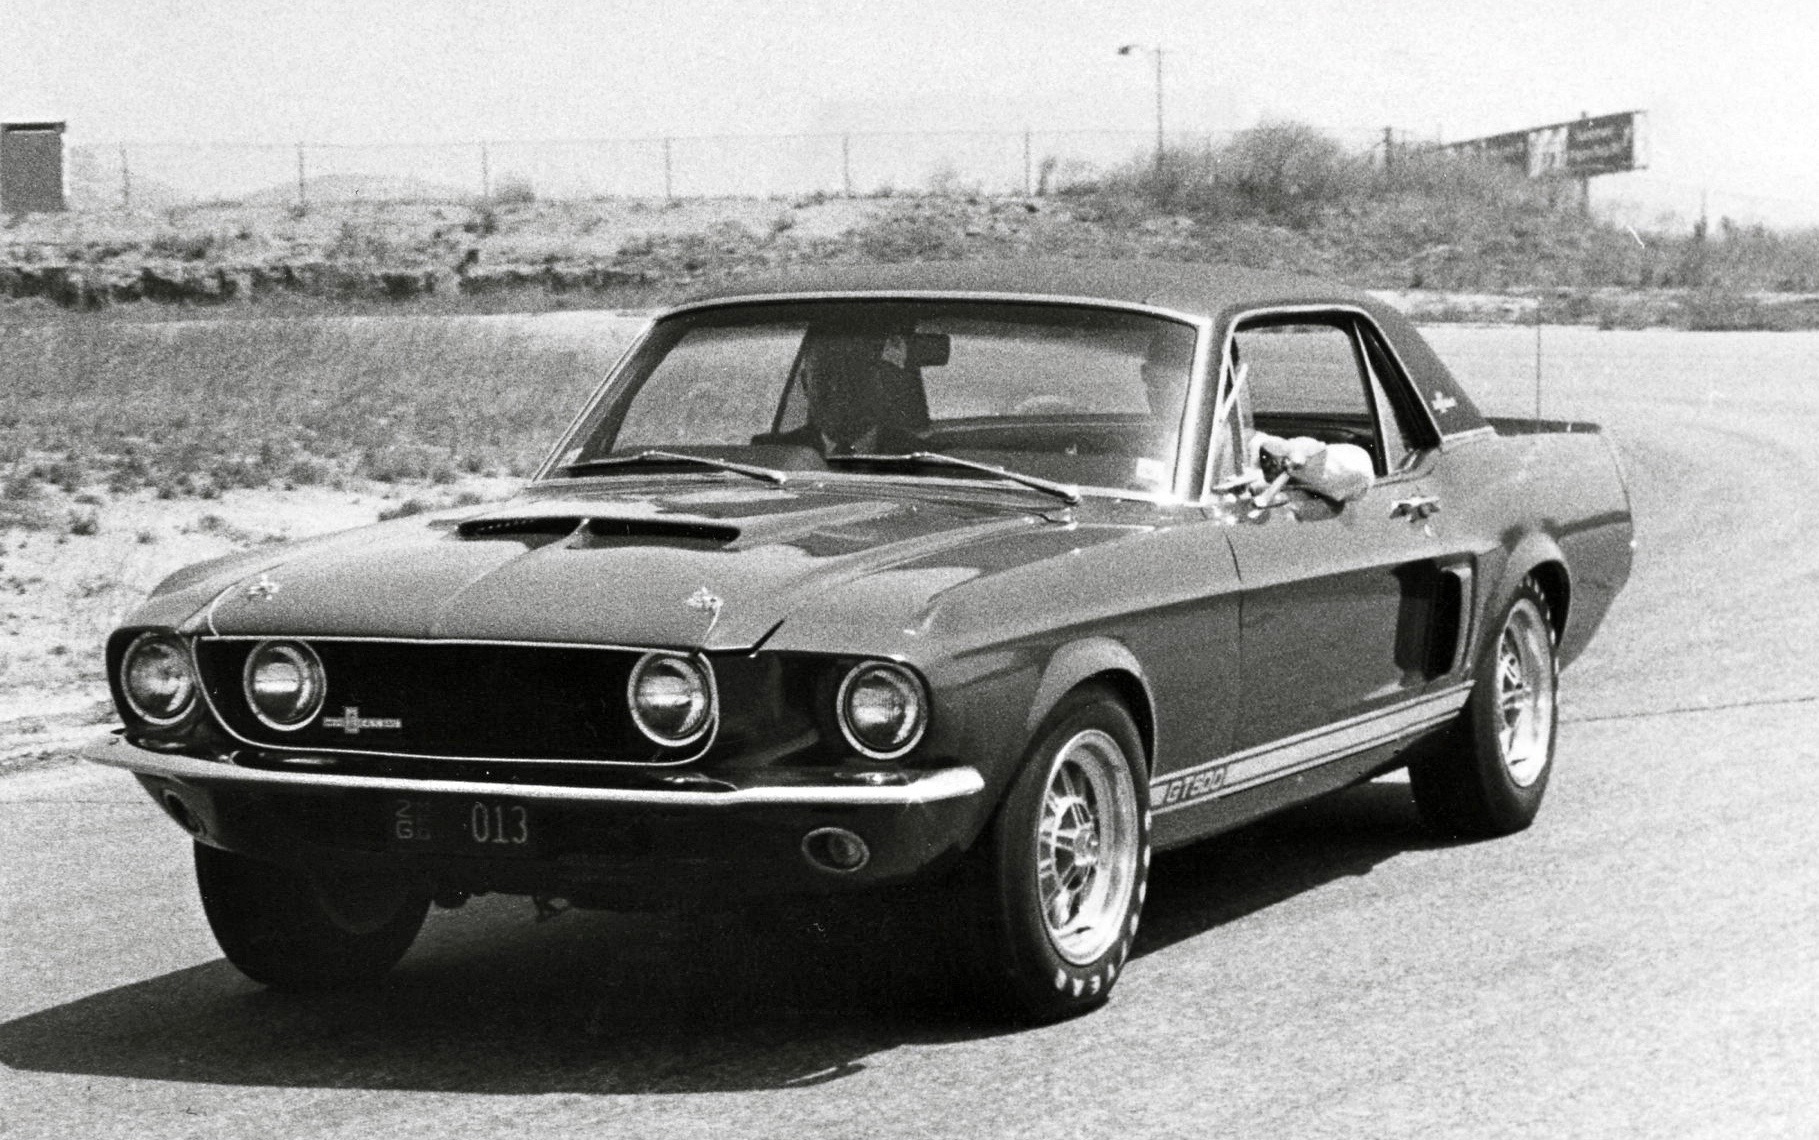 Shelby's 'Little Red', Thought to have been destroyed, Shelby’s ‘Little Red’ prototype discovered, ClassicCars.com Journal